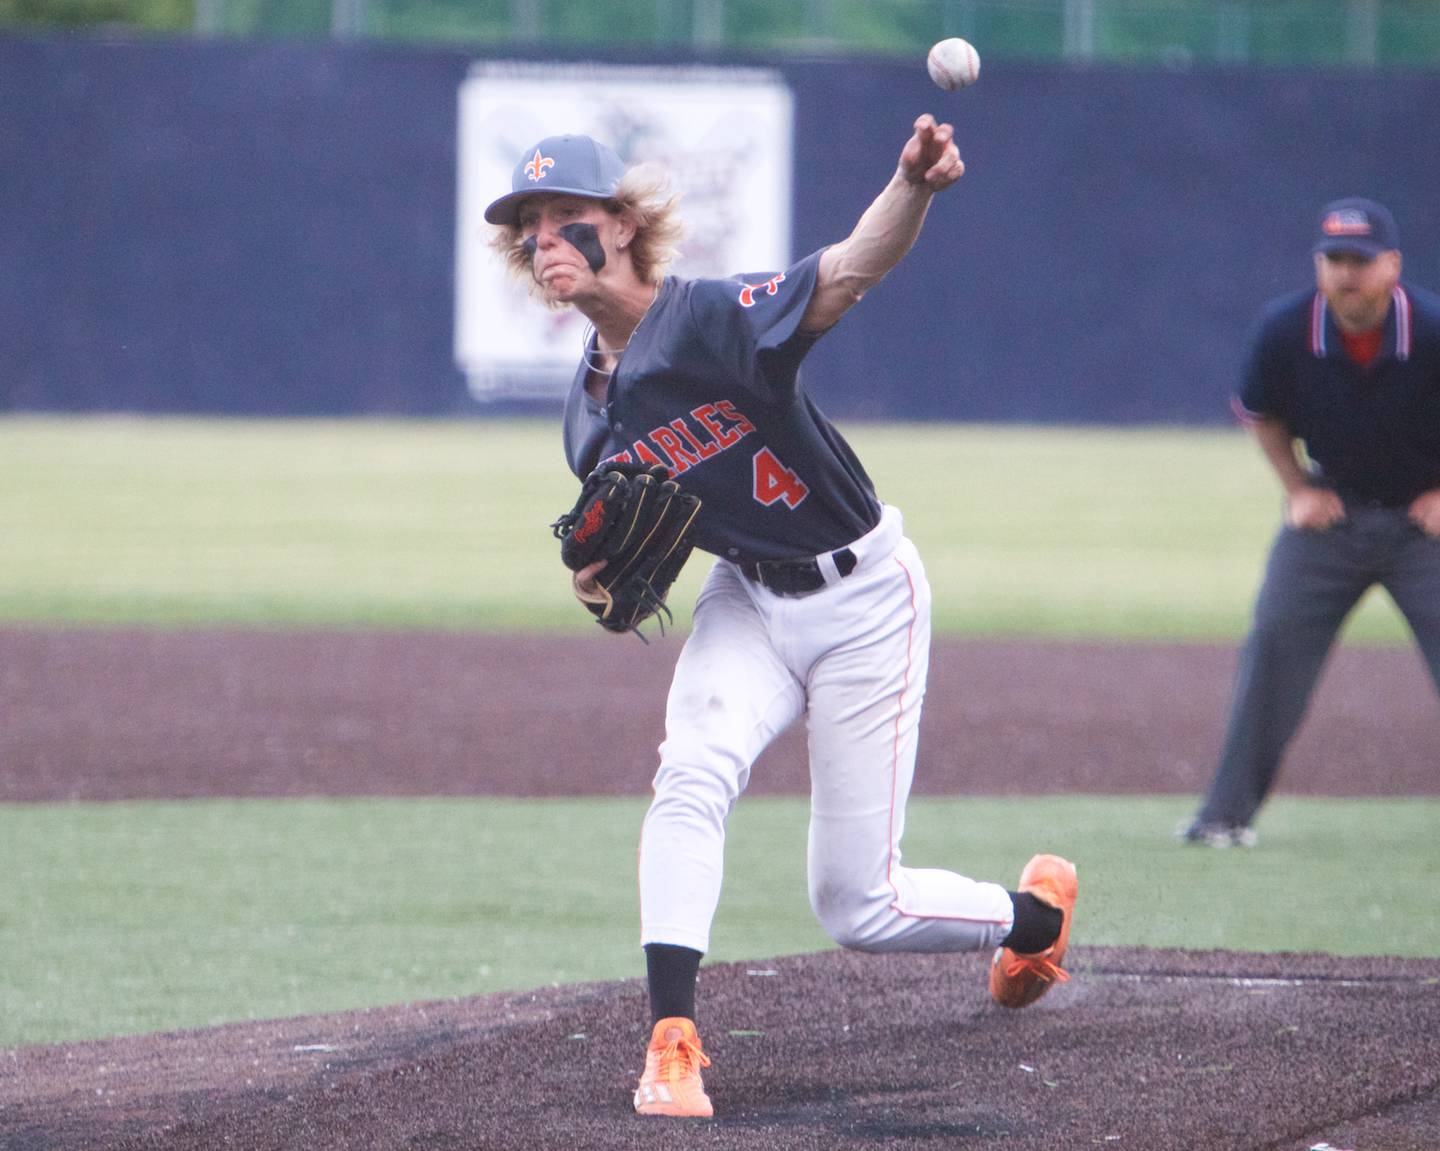 St Charles East's Joe Arend delivers a pitch against York at the Class 4A Sectional Semi Final on Wednesday, May 31, 2023 in Elgin.